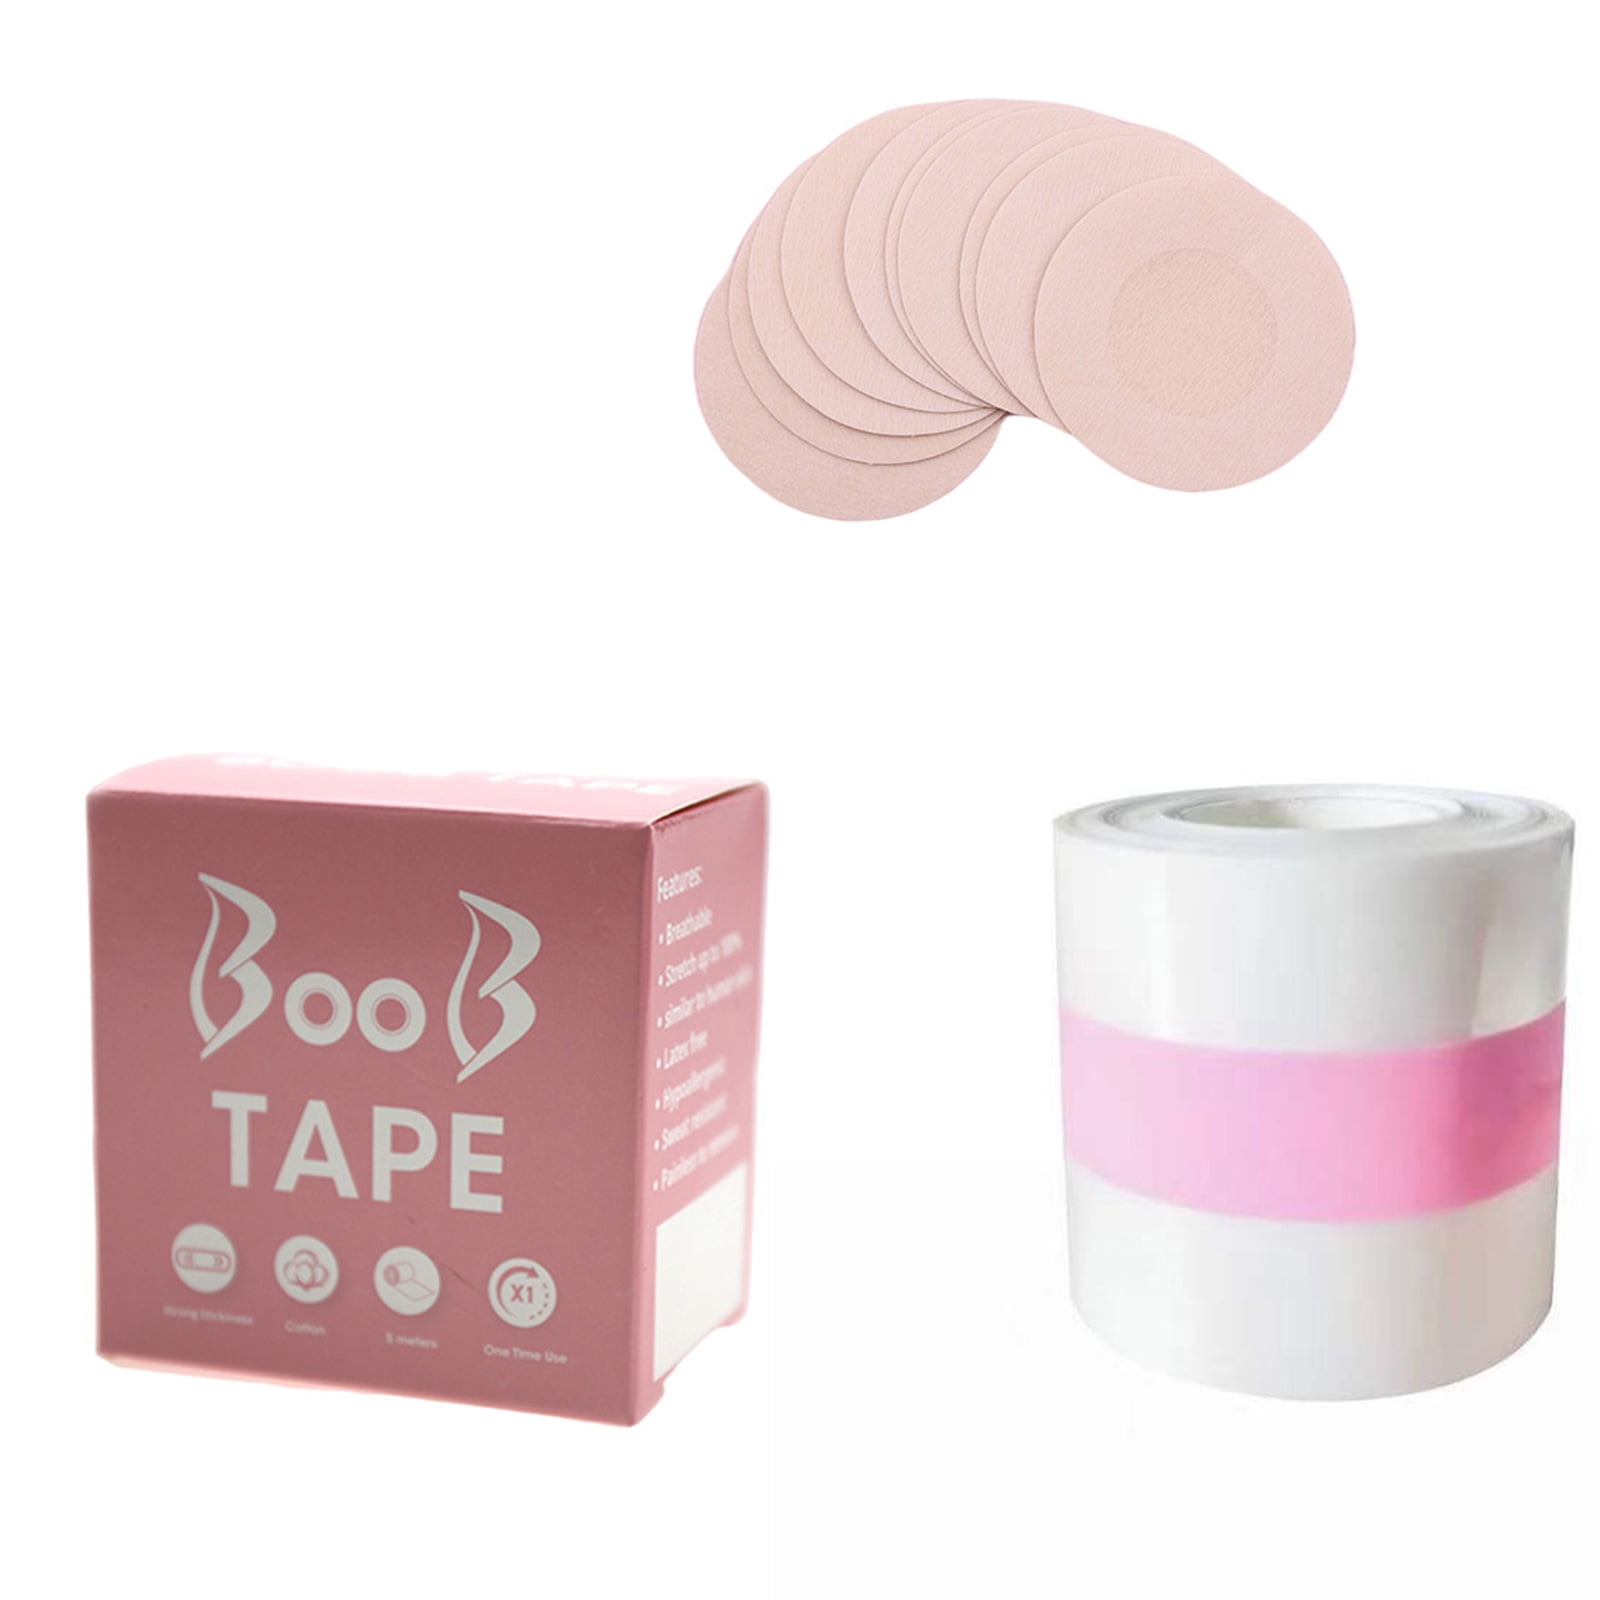 Breast Lift Tape Stores